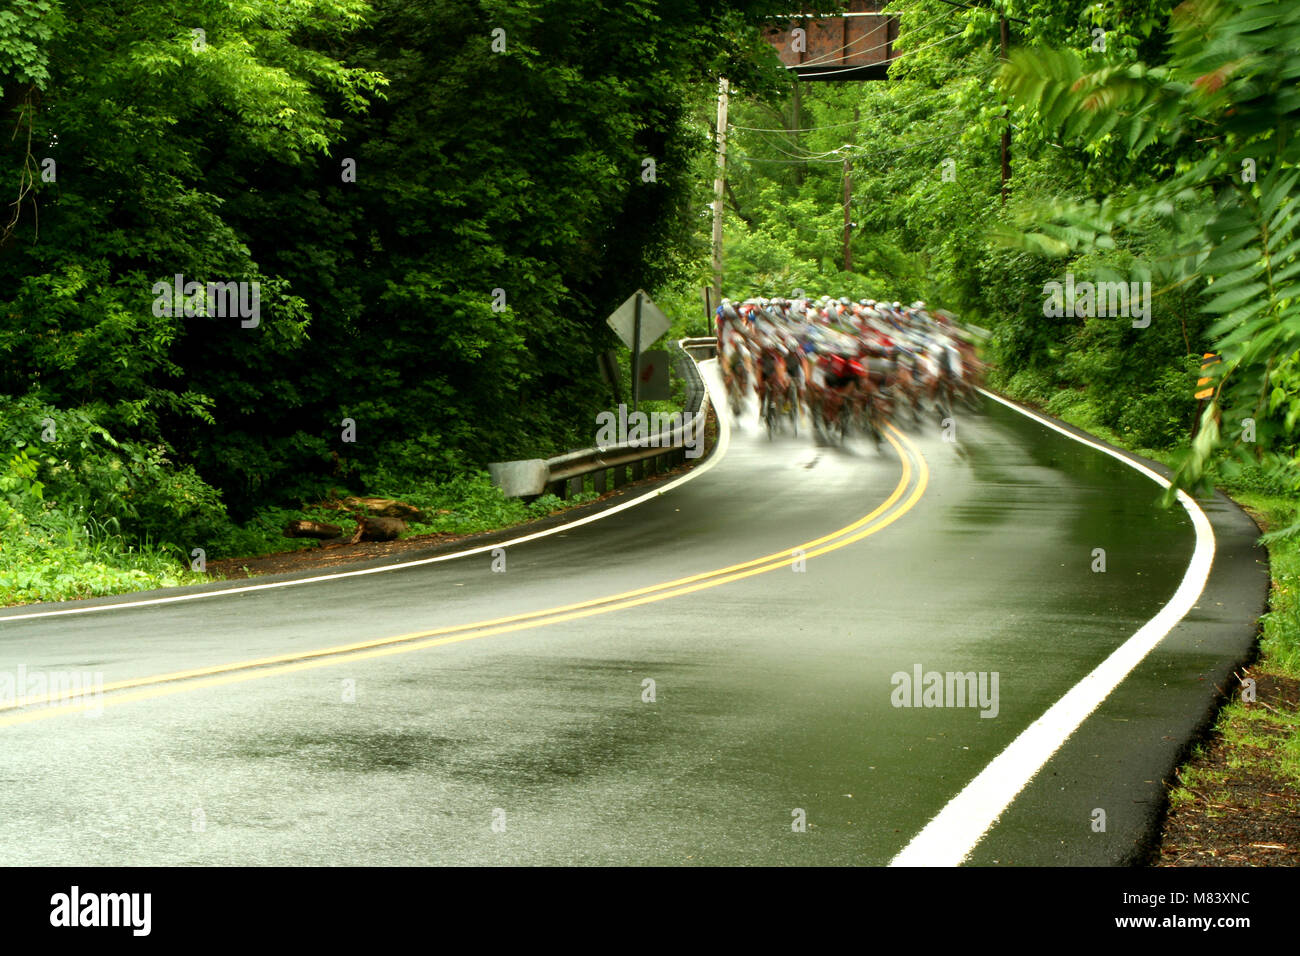 A Bicycle road race Stock Photo